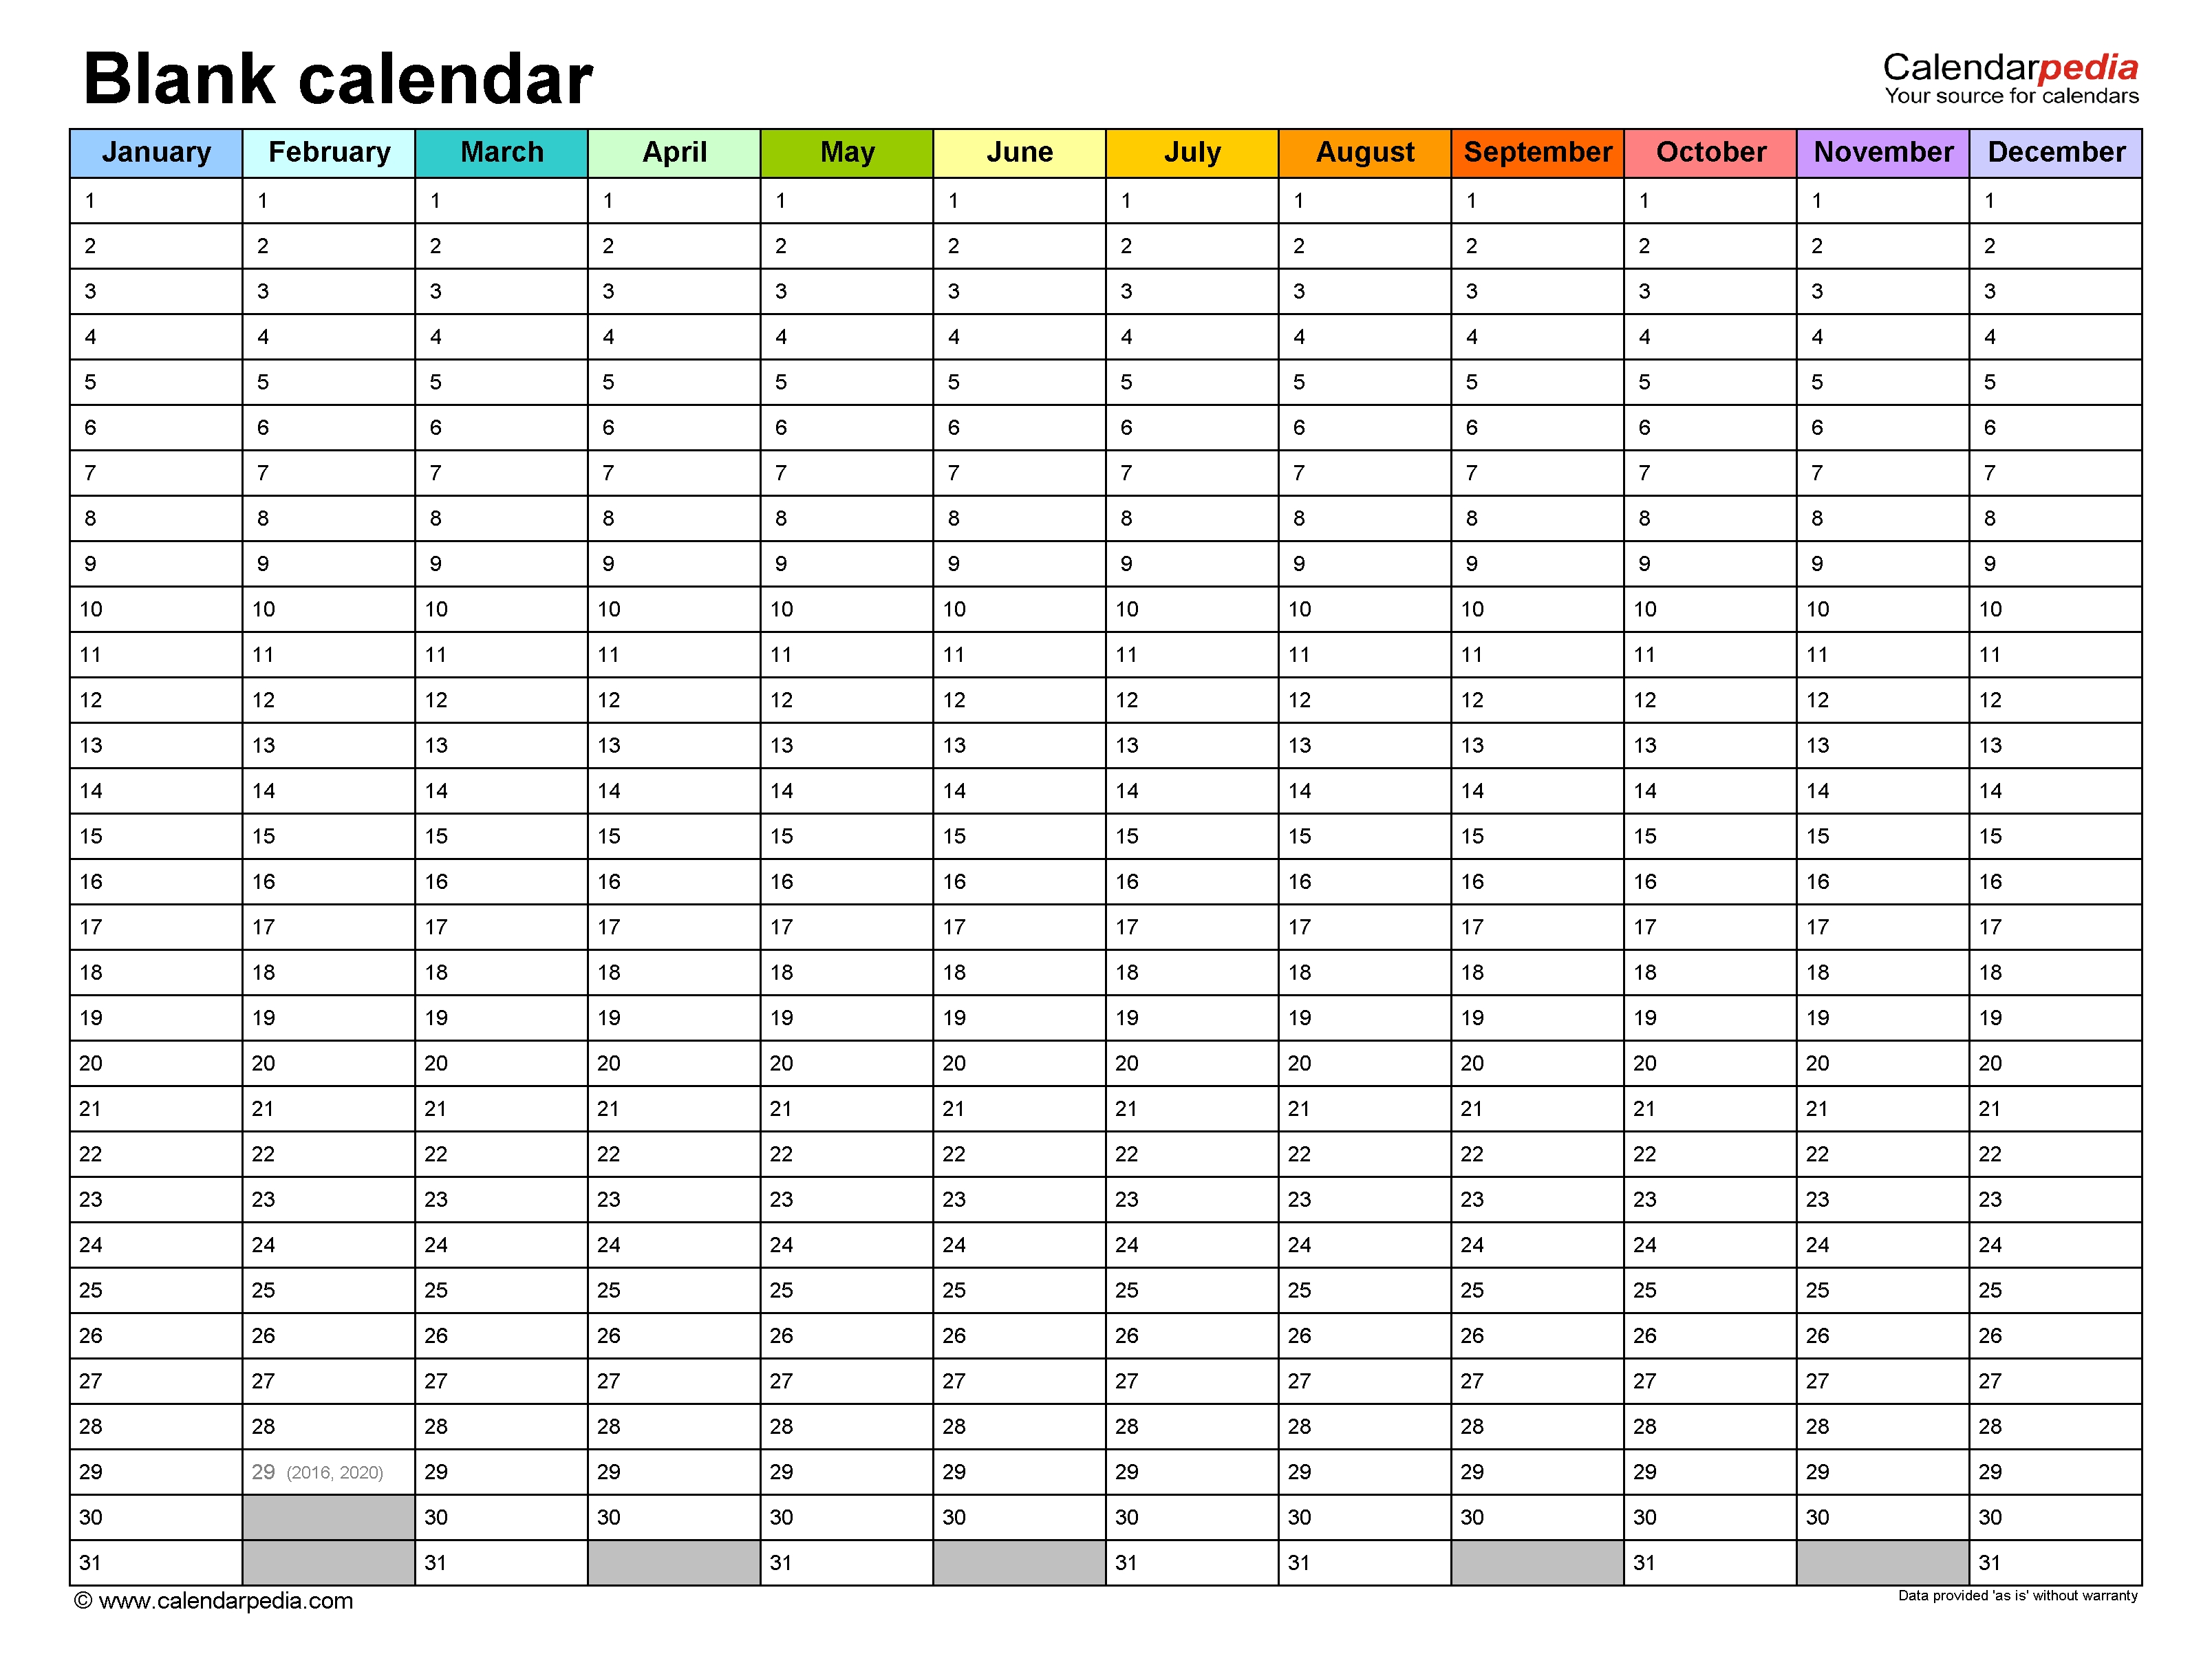 Blank Calendars - Free Printable Microsoft Word Templates Calendar Template Year On One Page